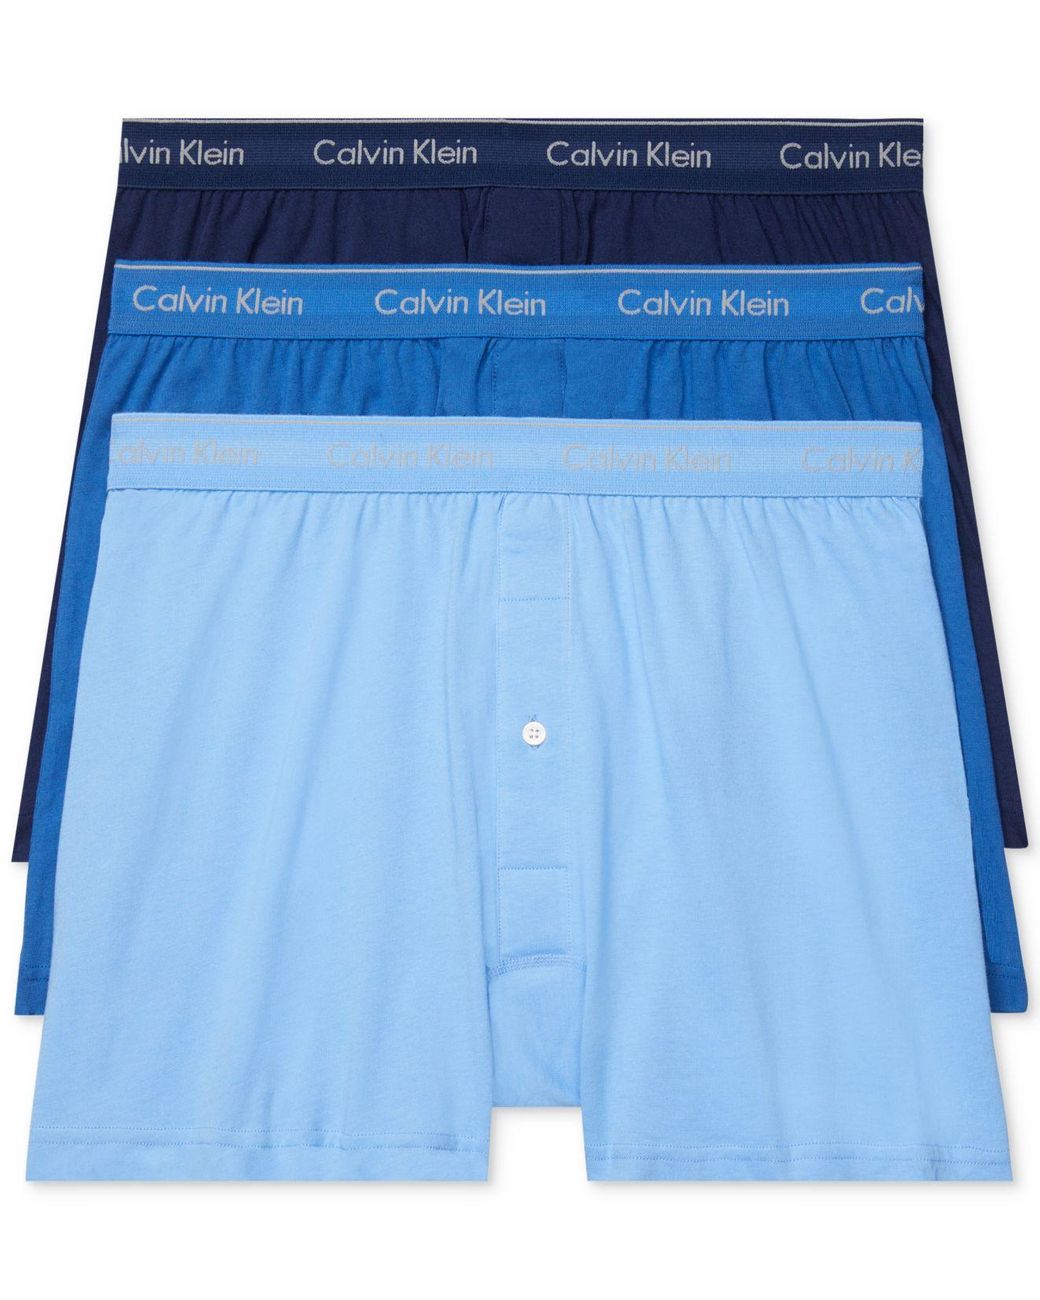 Calvin Klein 3-pack Cotton Classics Knit Boxers in Blue for Men - Lyst